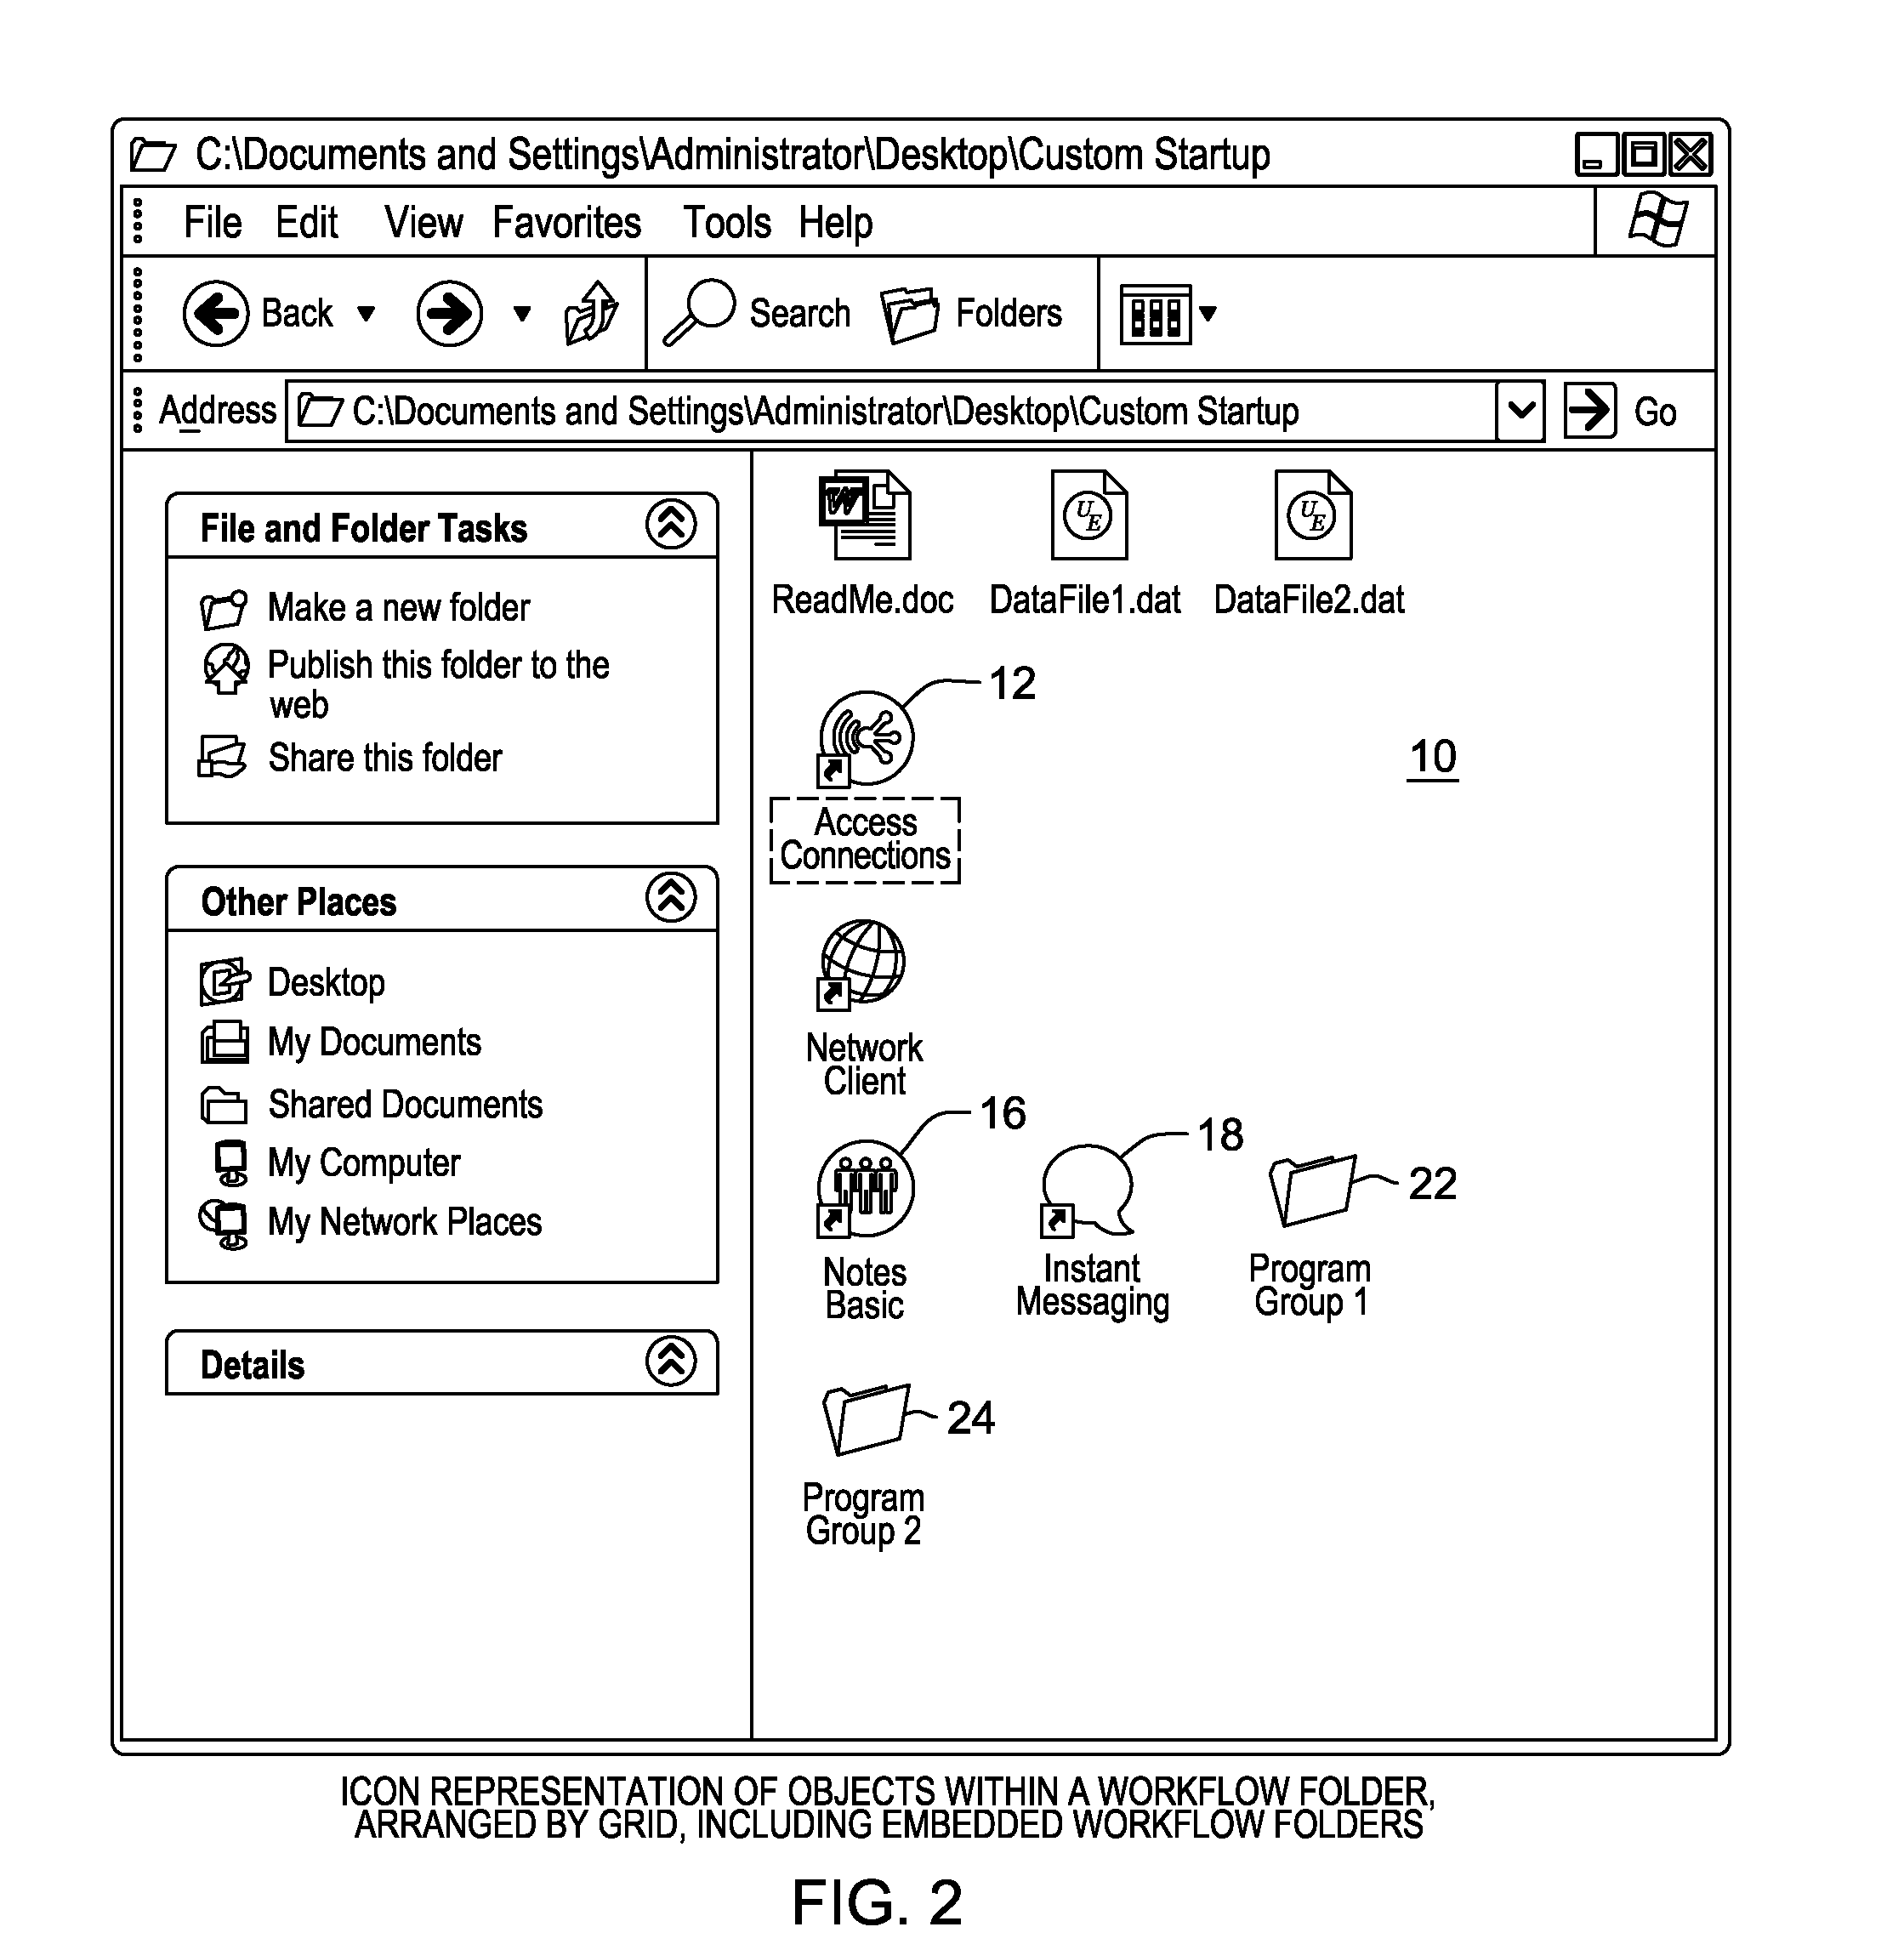 Designing task execution order based on location of the task icons within a graphical user interface